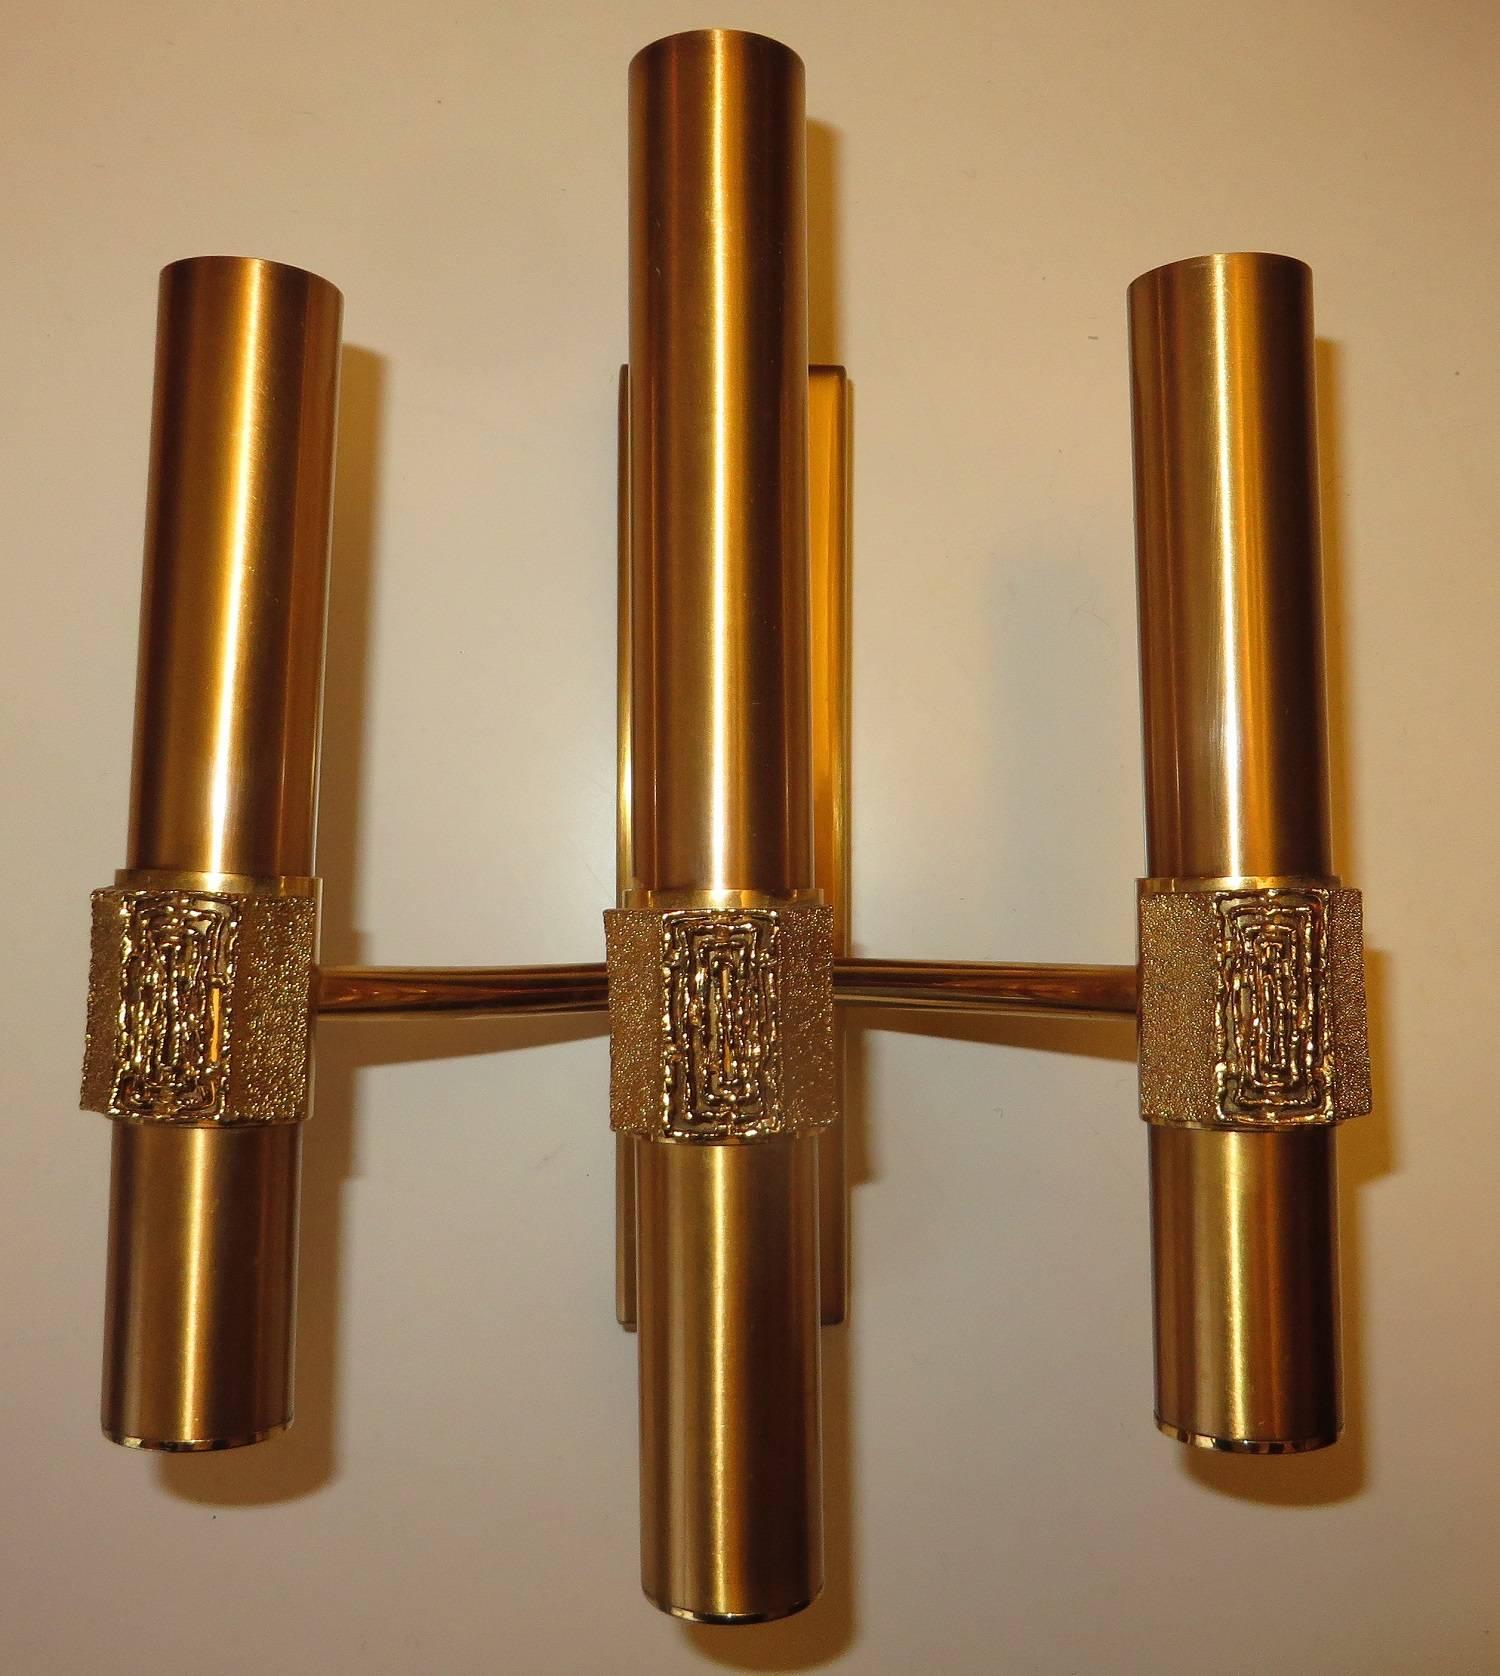 Angelo Brotto for Esperia set of three midcentury finely decorated brass sconces.

Very good vintage condition with minimal signs of age and use.

If sold to US or Canada will be adapted for standard US candelabra bulbs.